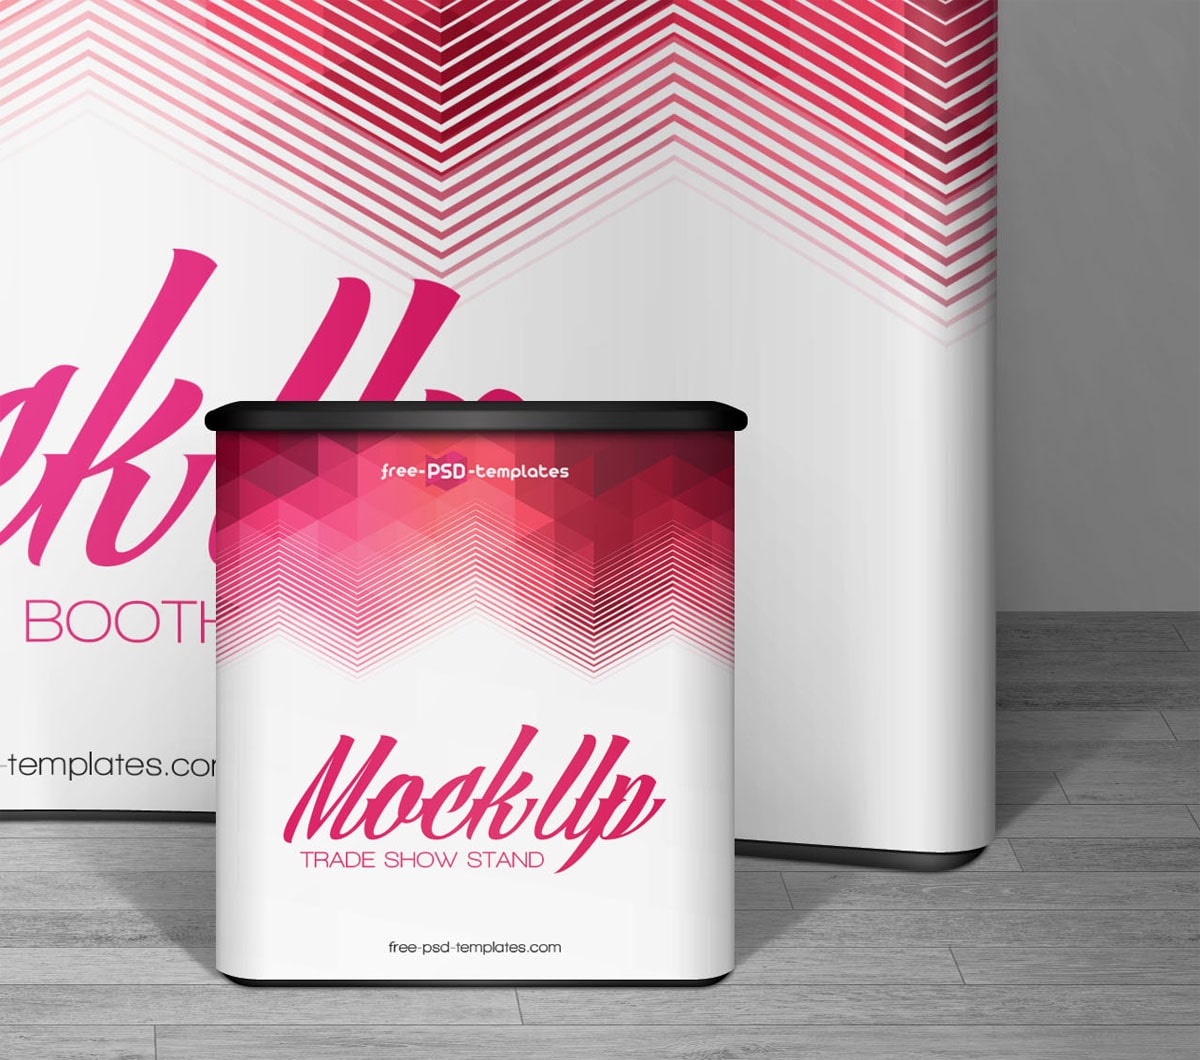 Download Free Trade Show Booth Mockup - Find the Perfect Creative Mockups Freebies to Showcase your ...